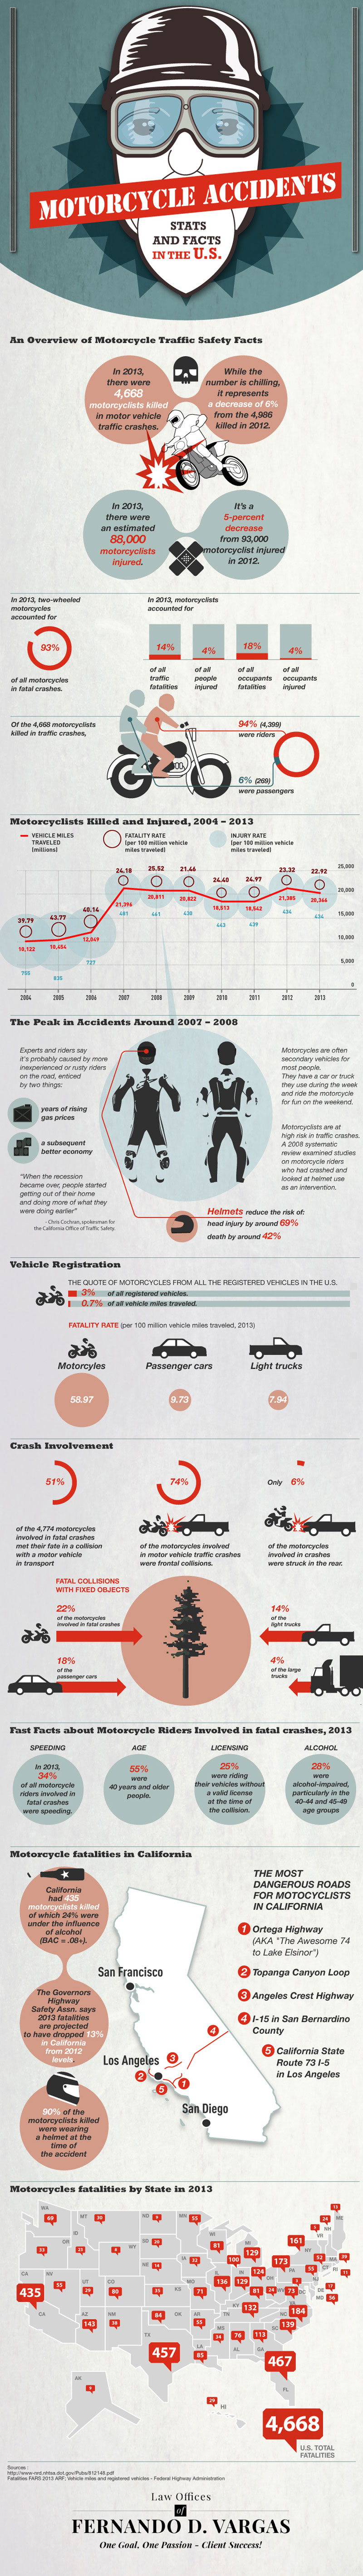 Motorcycles Accidents Infographic